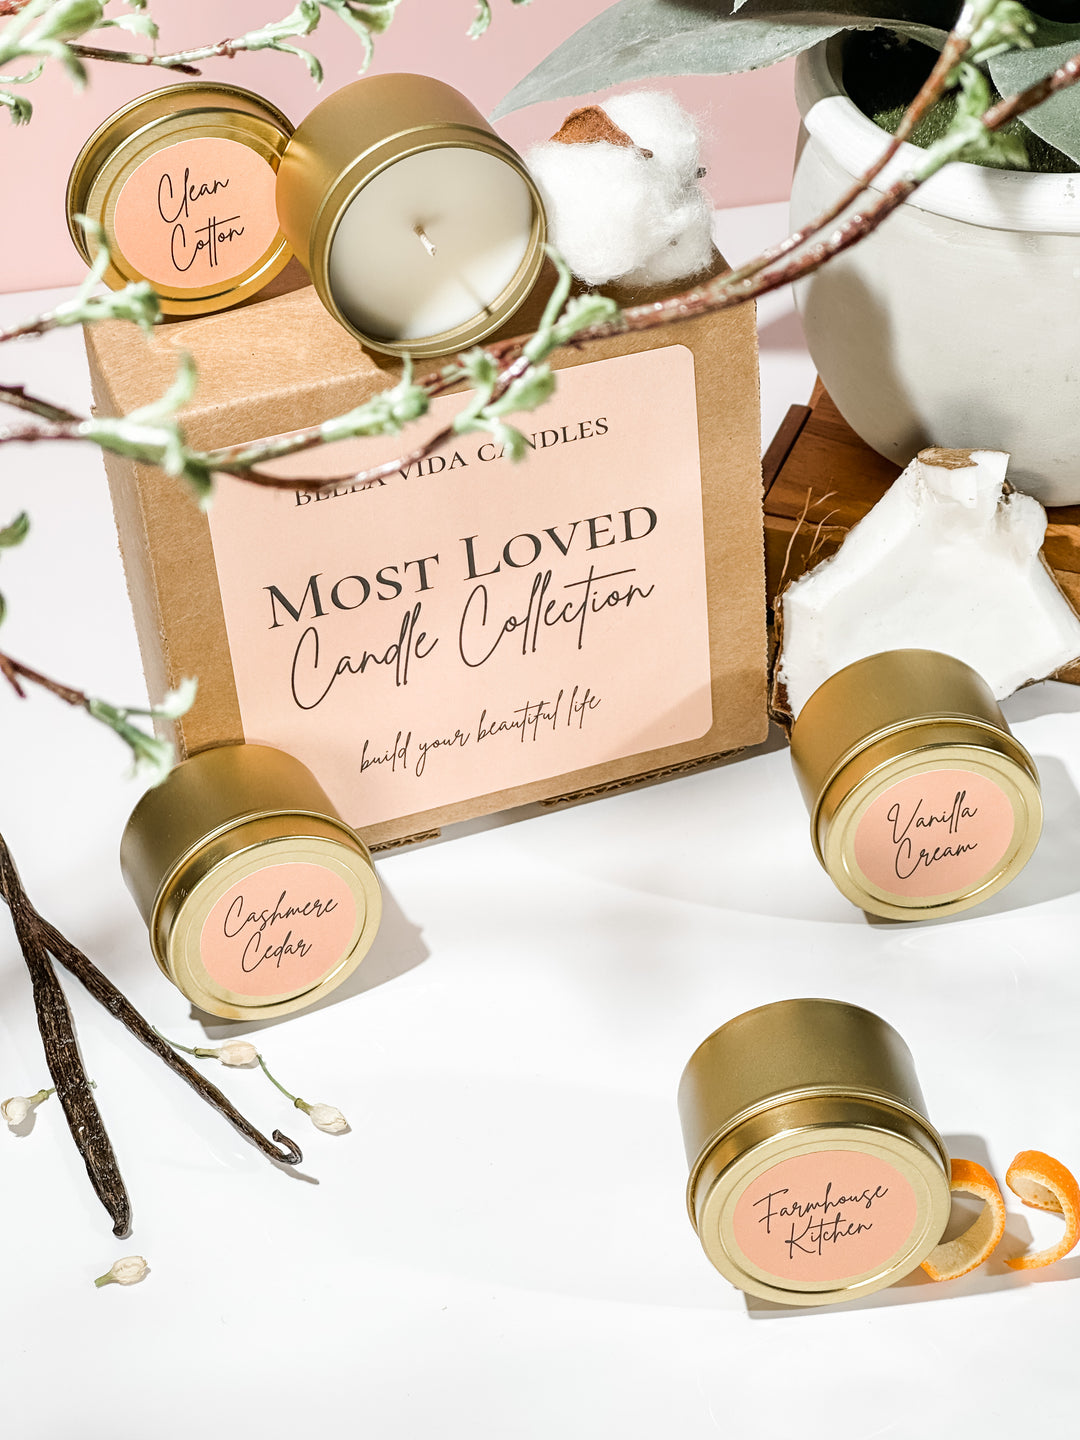 Most Loved Soy Candle Sniffer Box